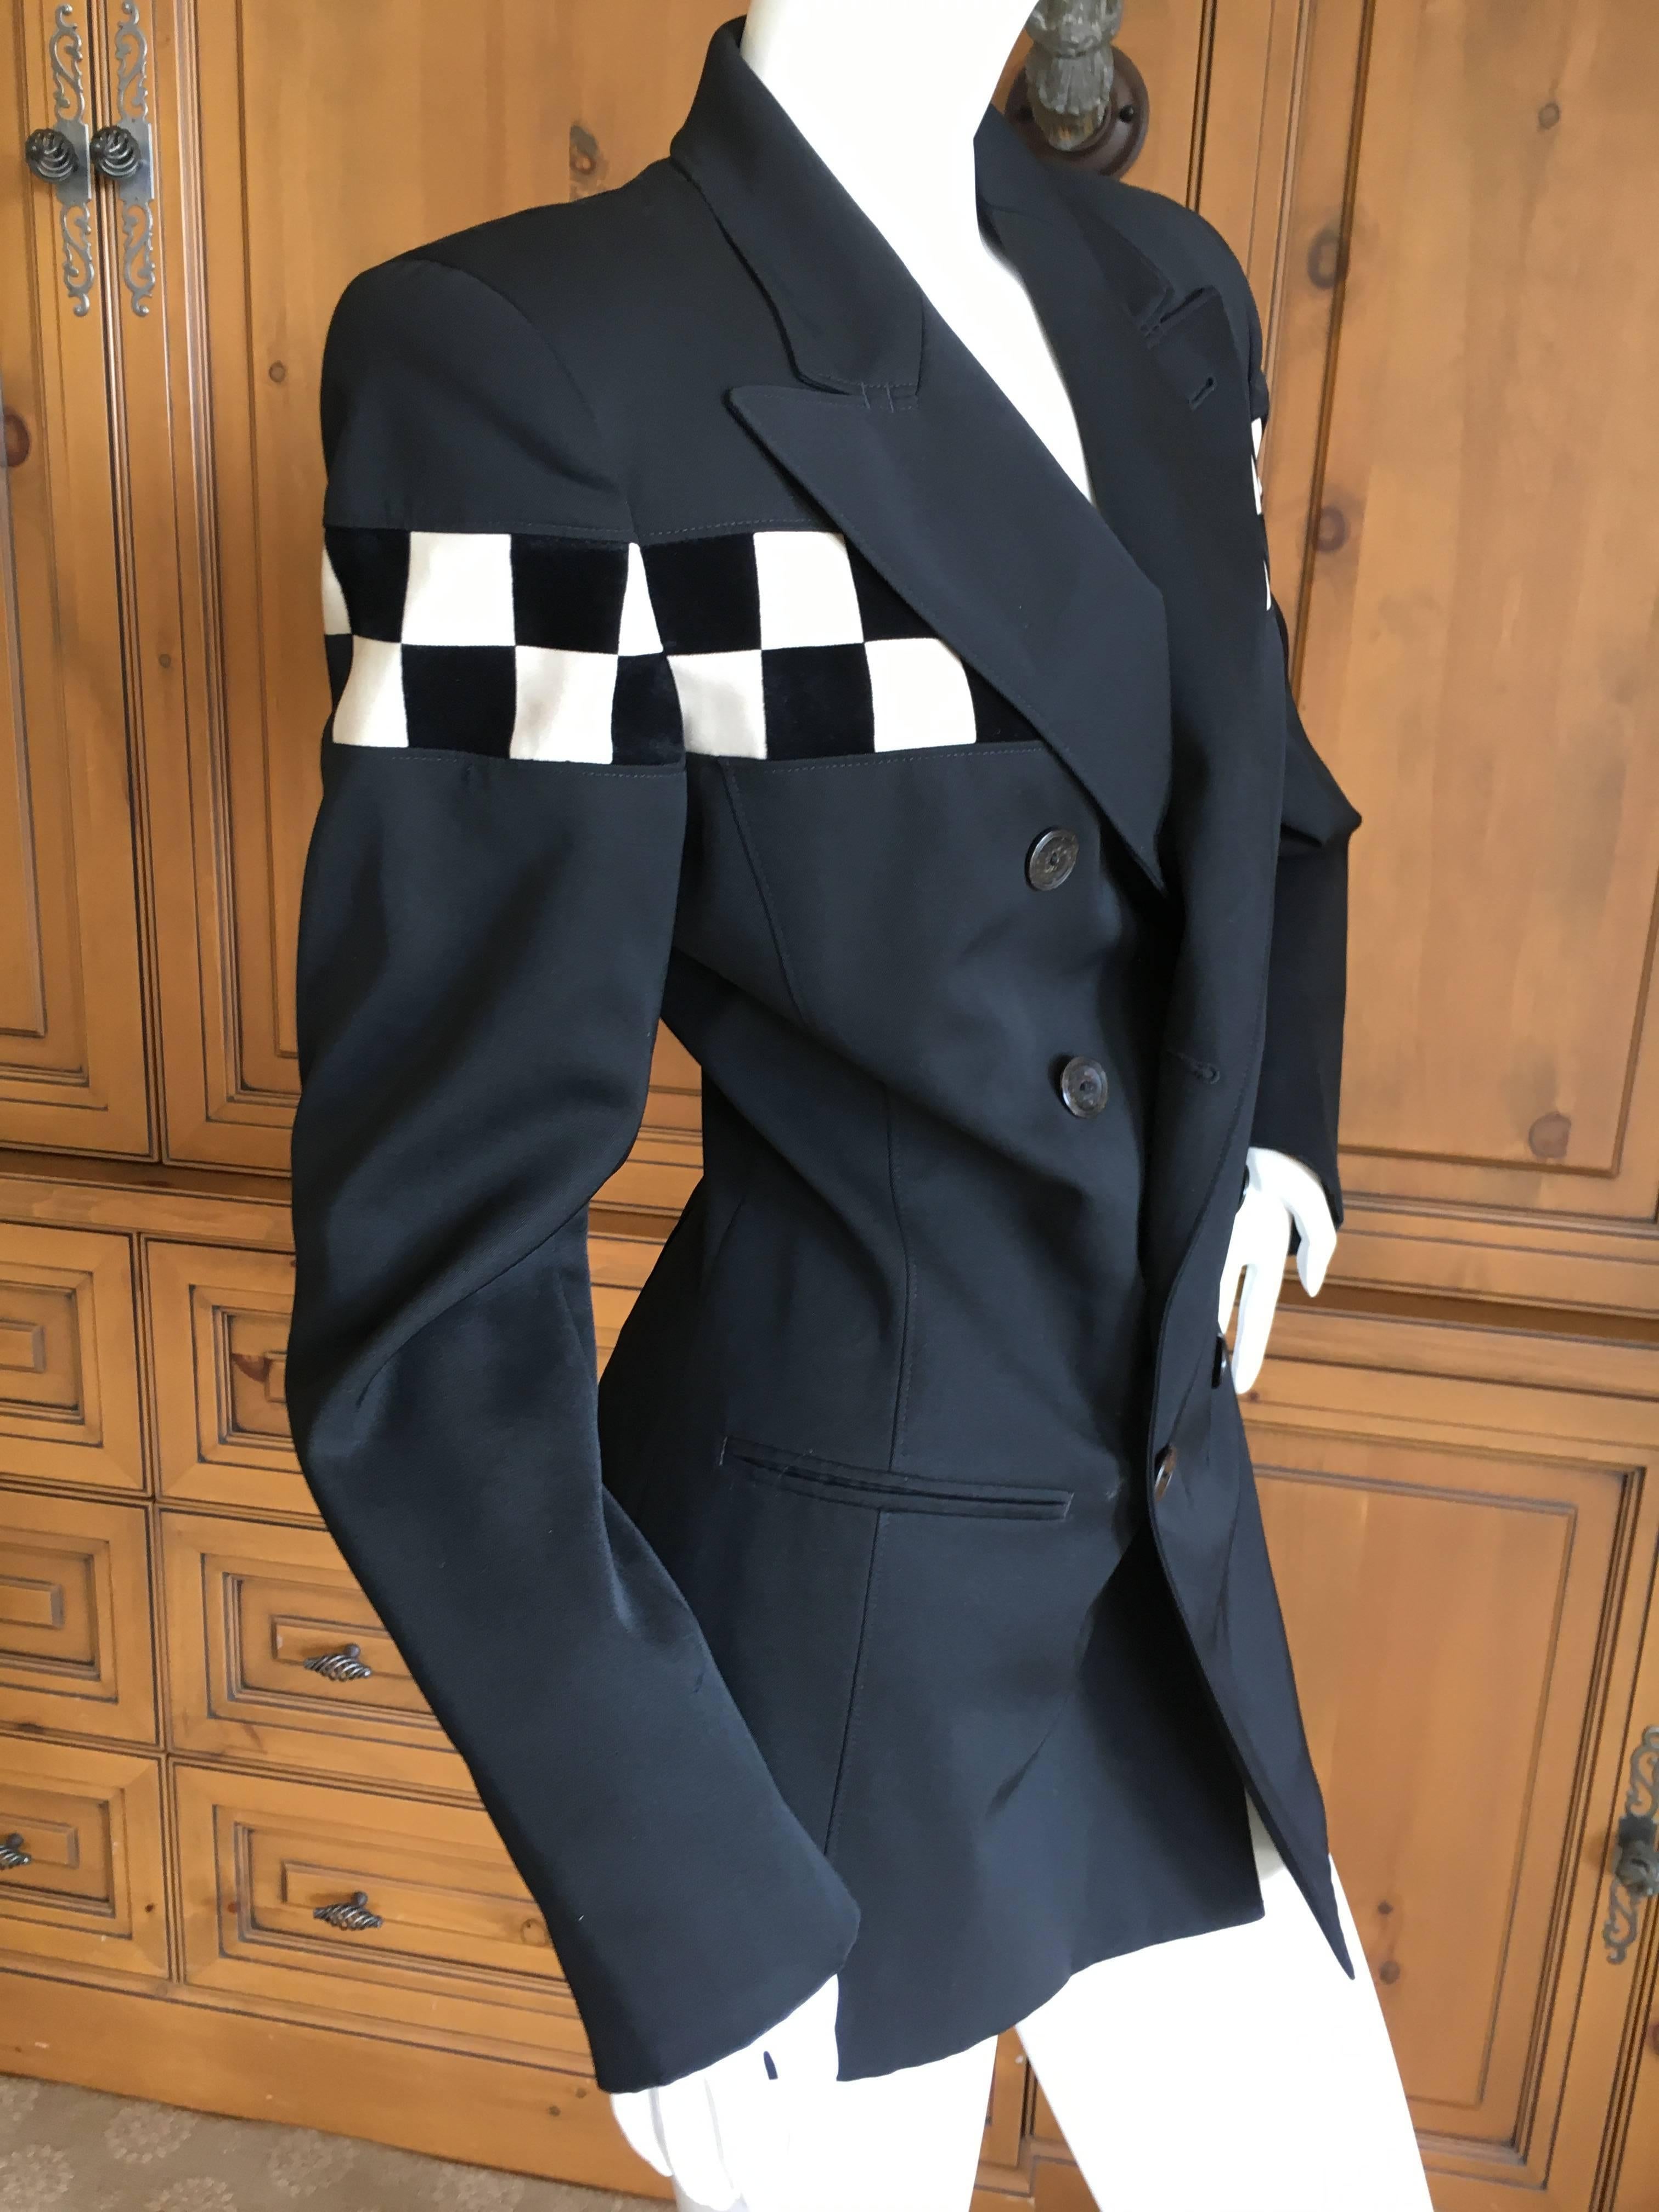 Jean Paul Gaultier 1980's Op Art Taxi Check Jacket In Excellent Condition For Sale In Cloverdale, CA